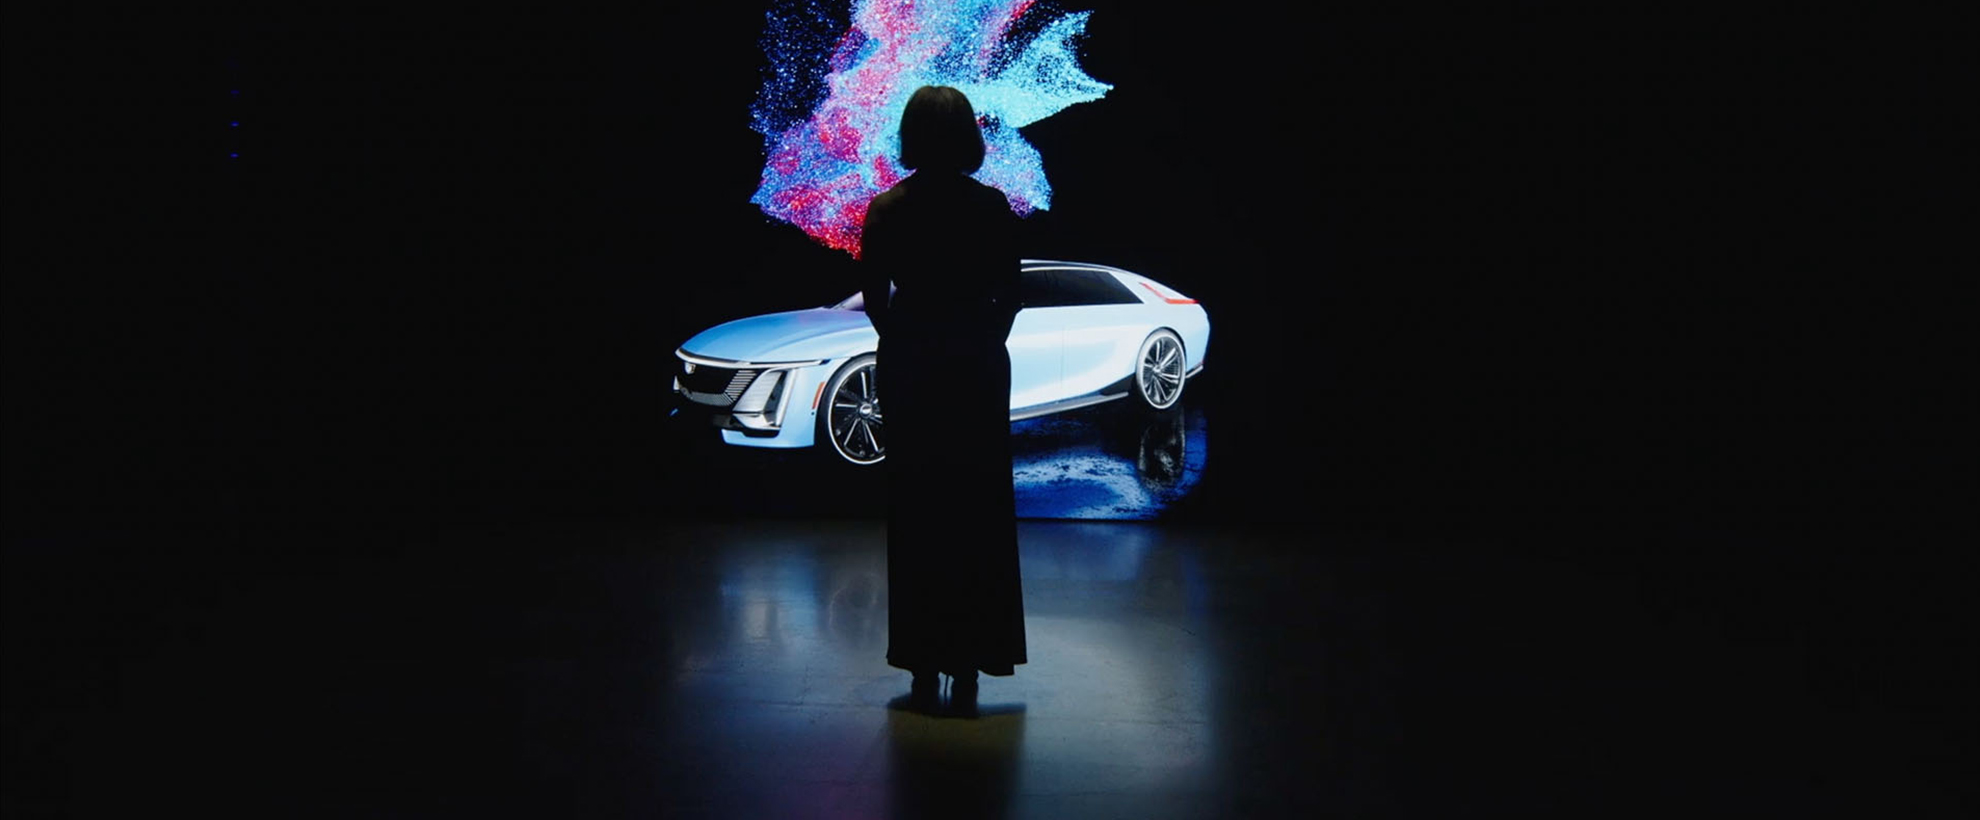 The silhouette of a person as they stand in front of a large screen in a dark room. On the screen is the Cadillac Lyriq car